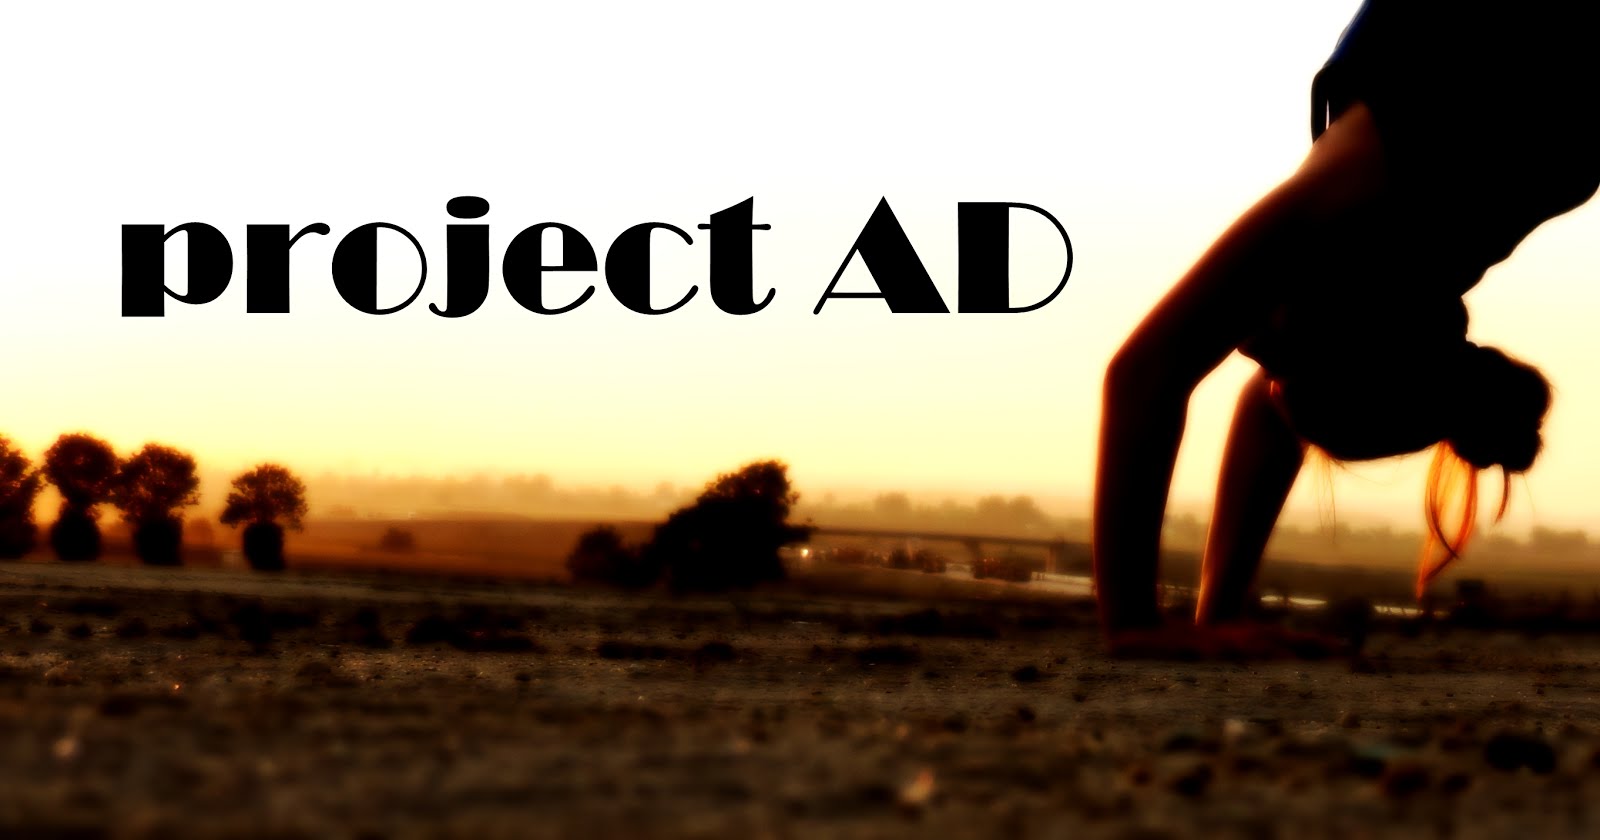 Project AD